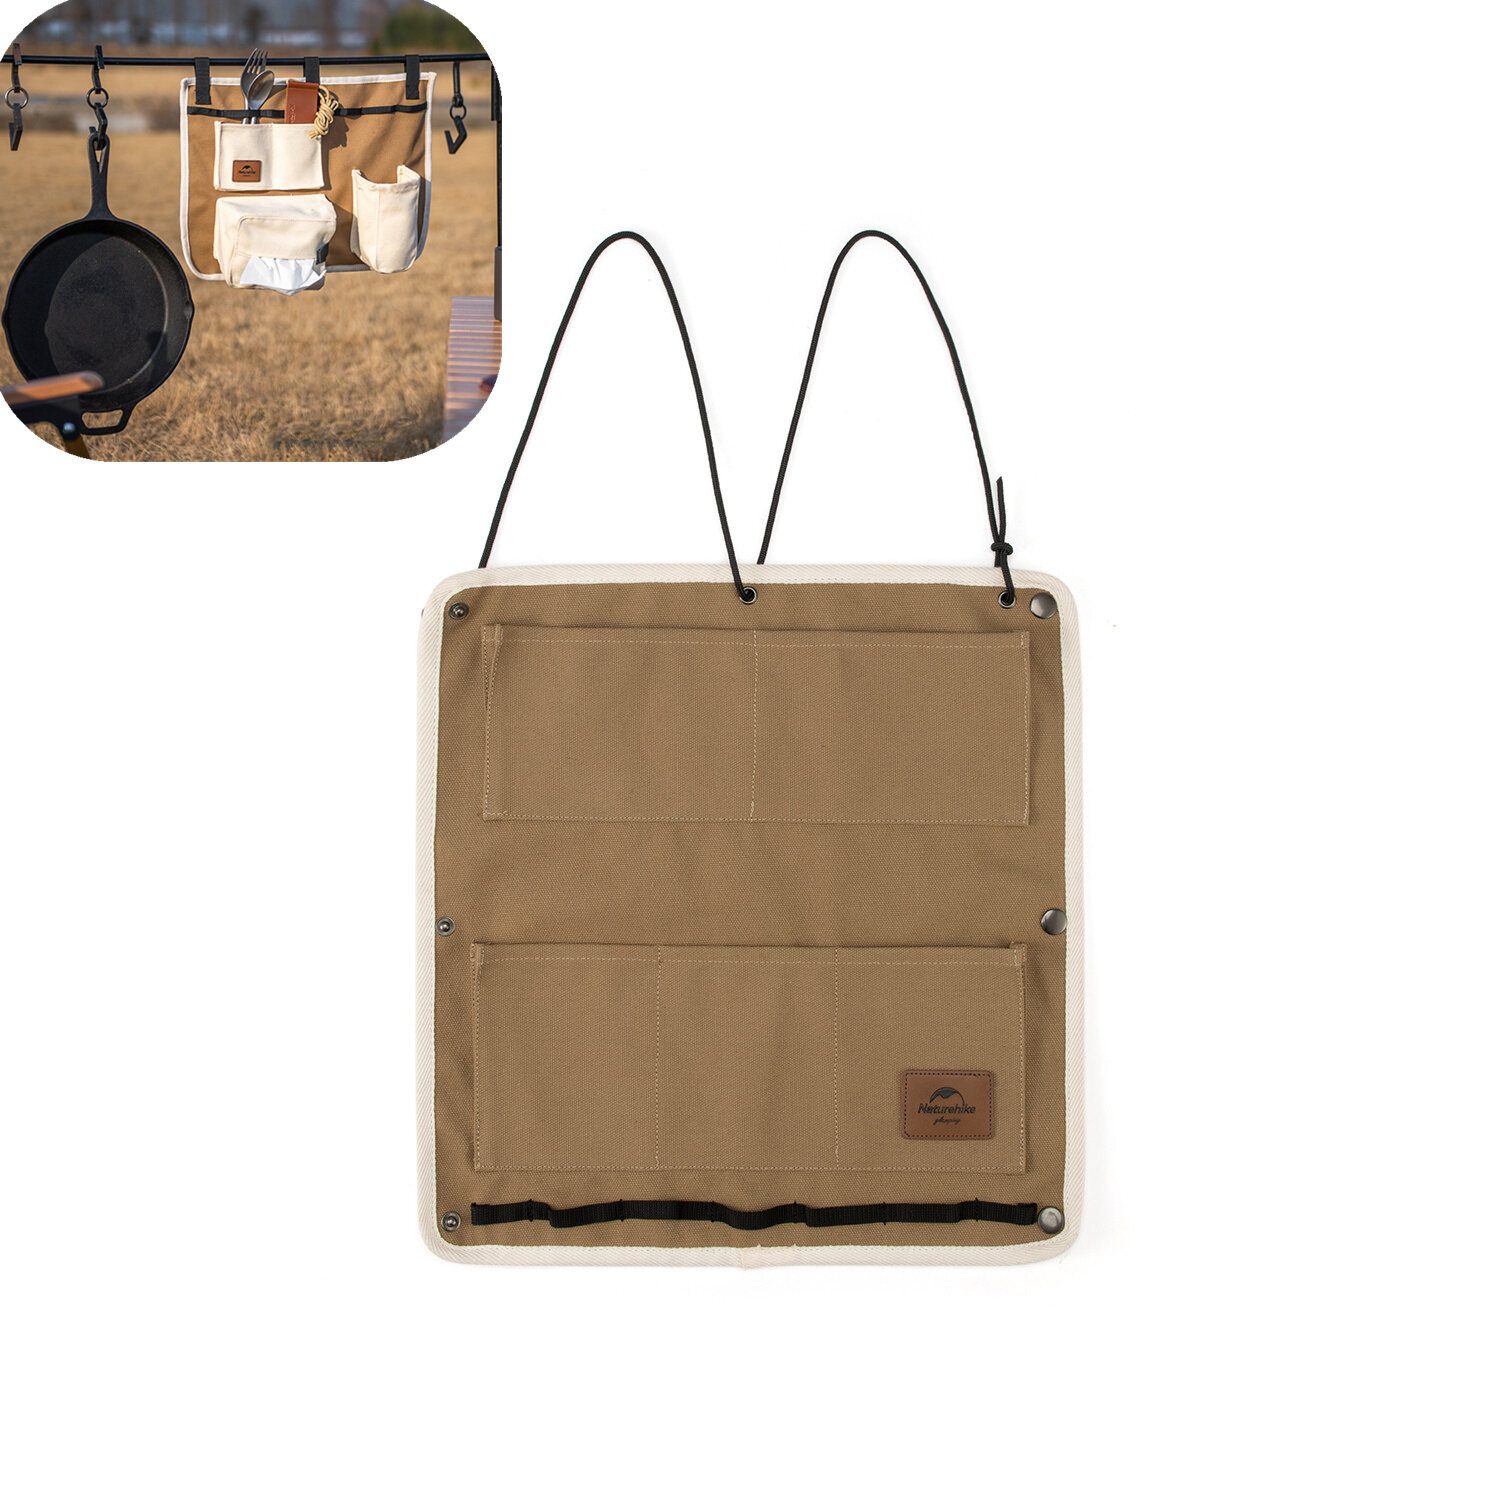 Naturehike Multiple Pockets Hanging Bag Camping Trolley Storage Bag Canvas Cloth Bag Outdoor Picnic Cooking BBQ